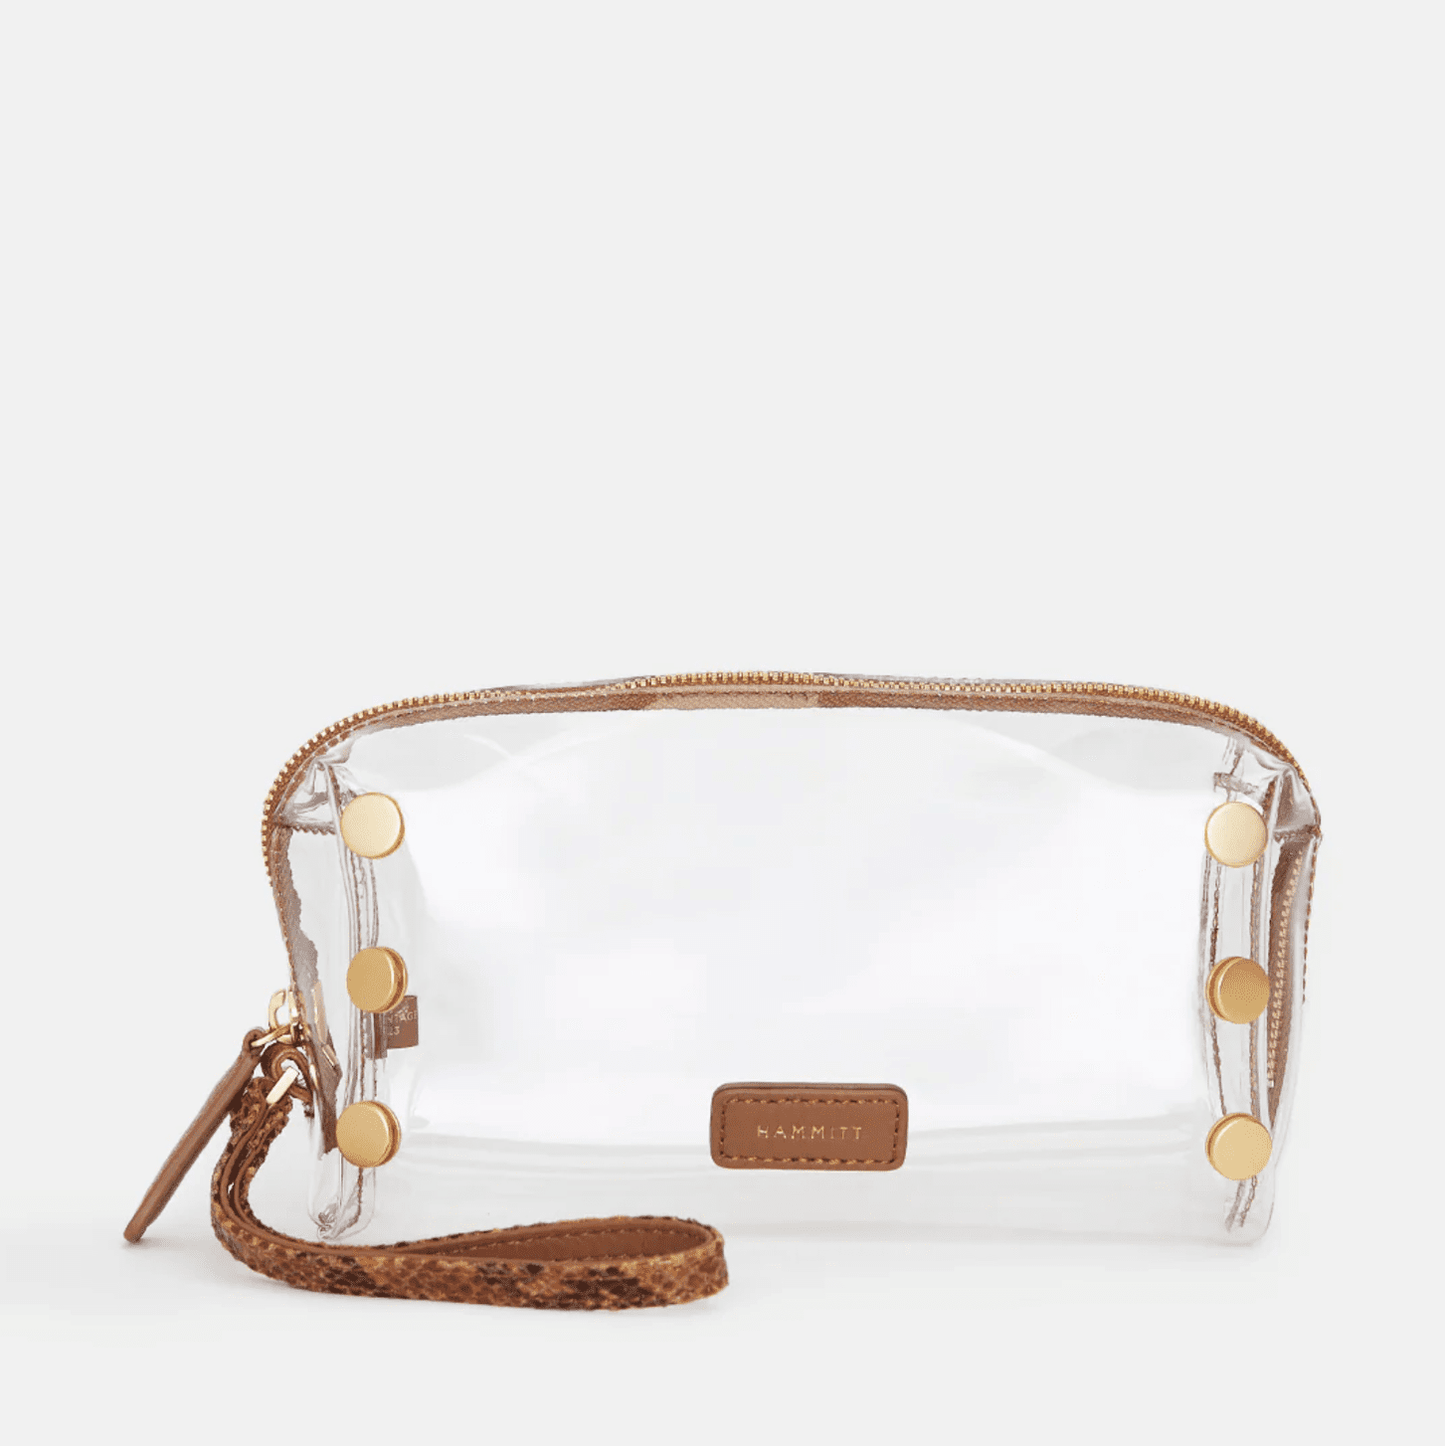 Hammitt Make Up Bag in Clear Centerpiece Snake/Brushed Gold